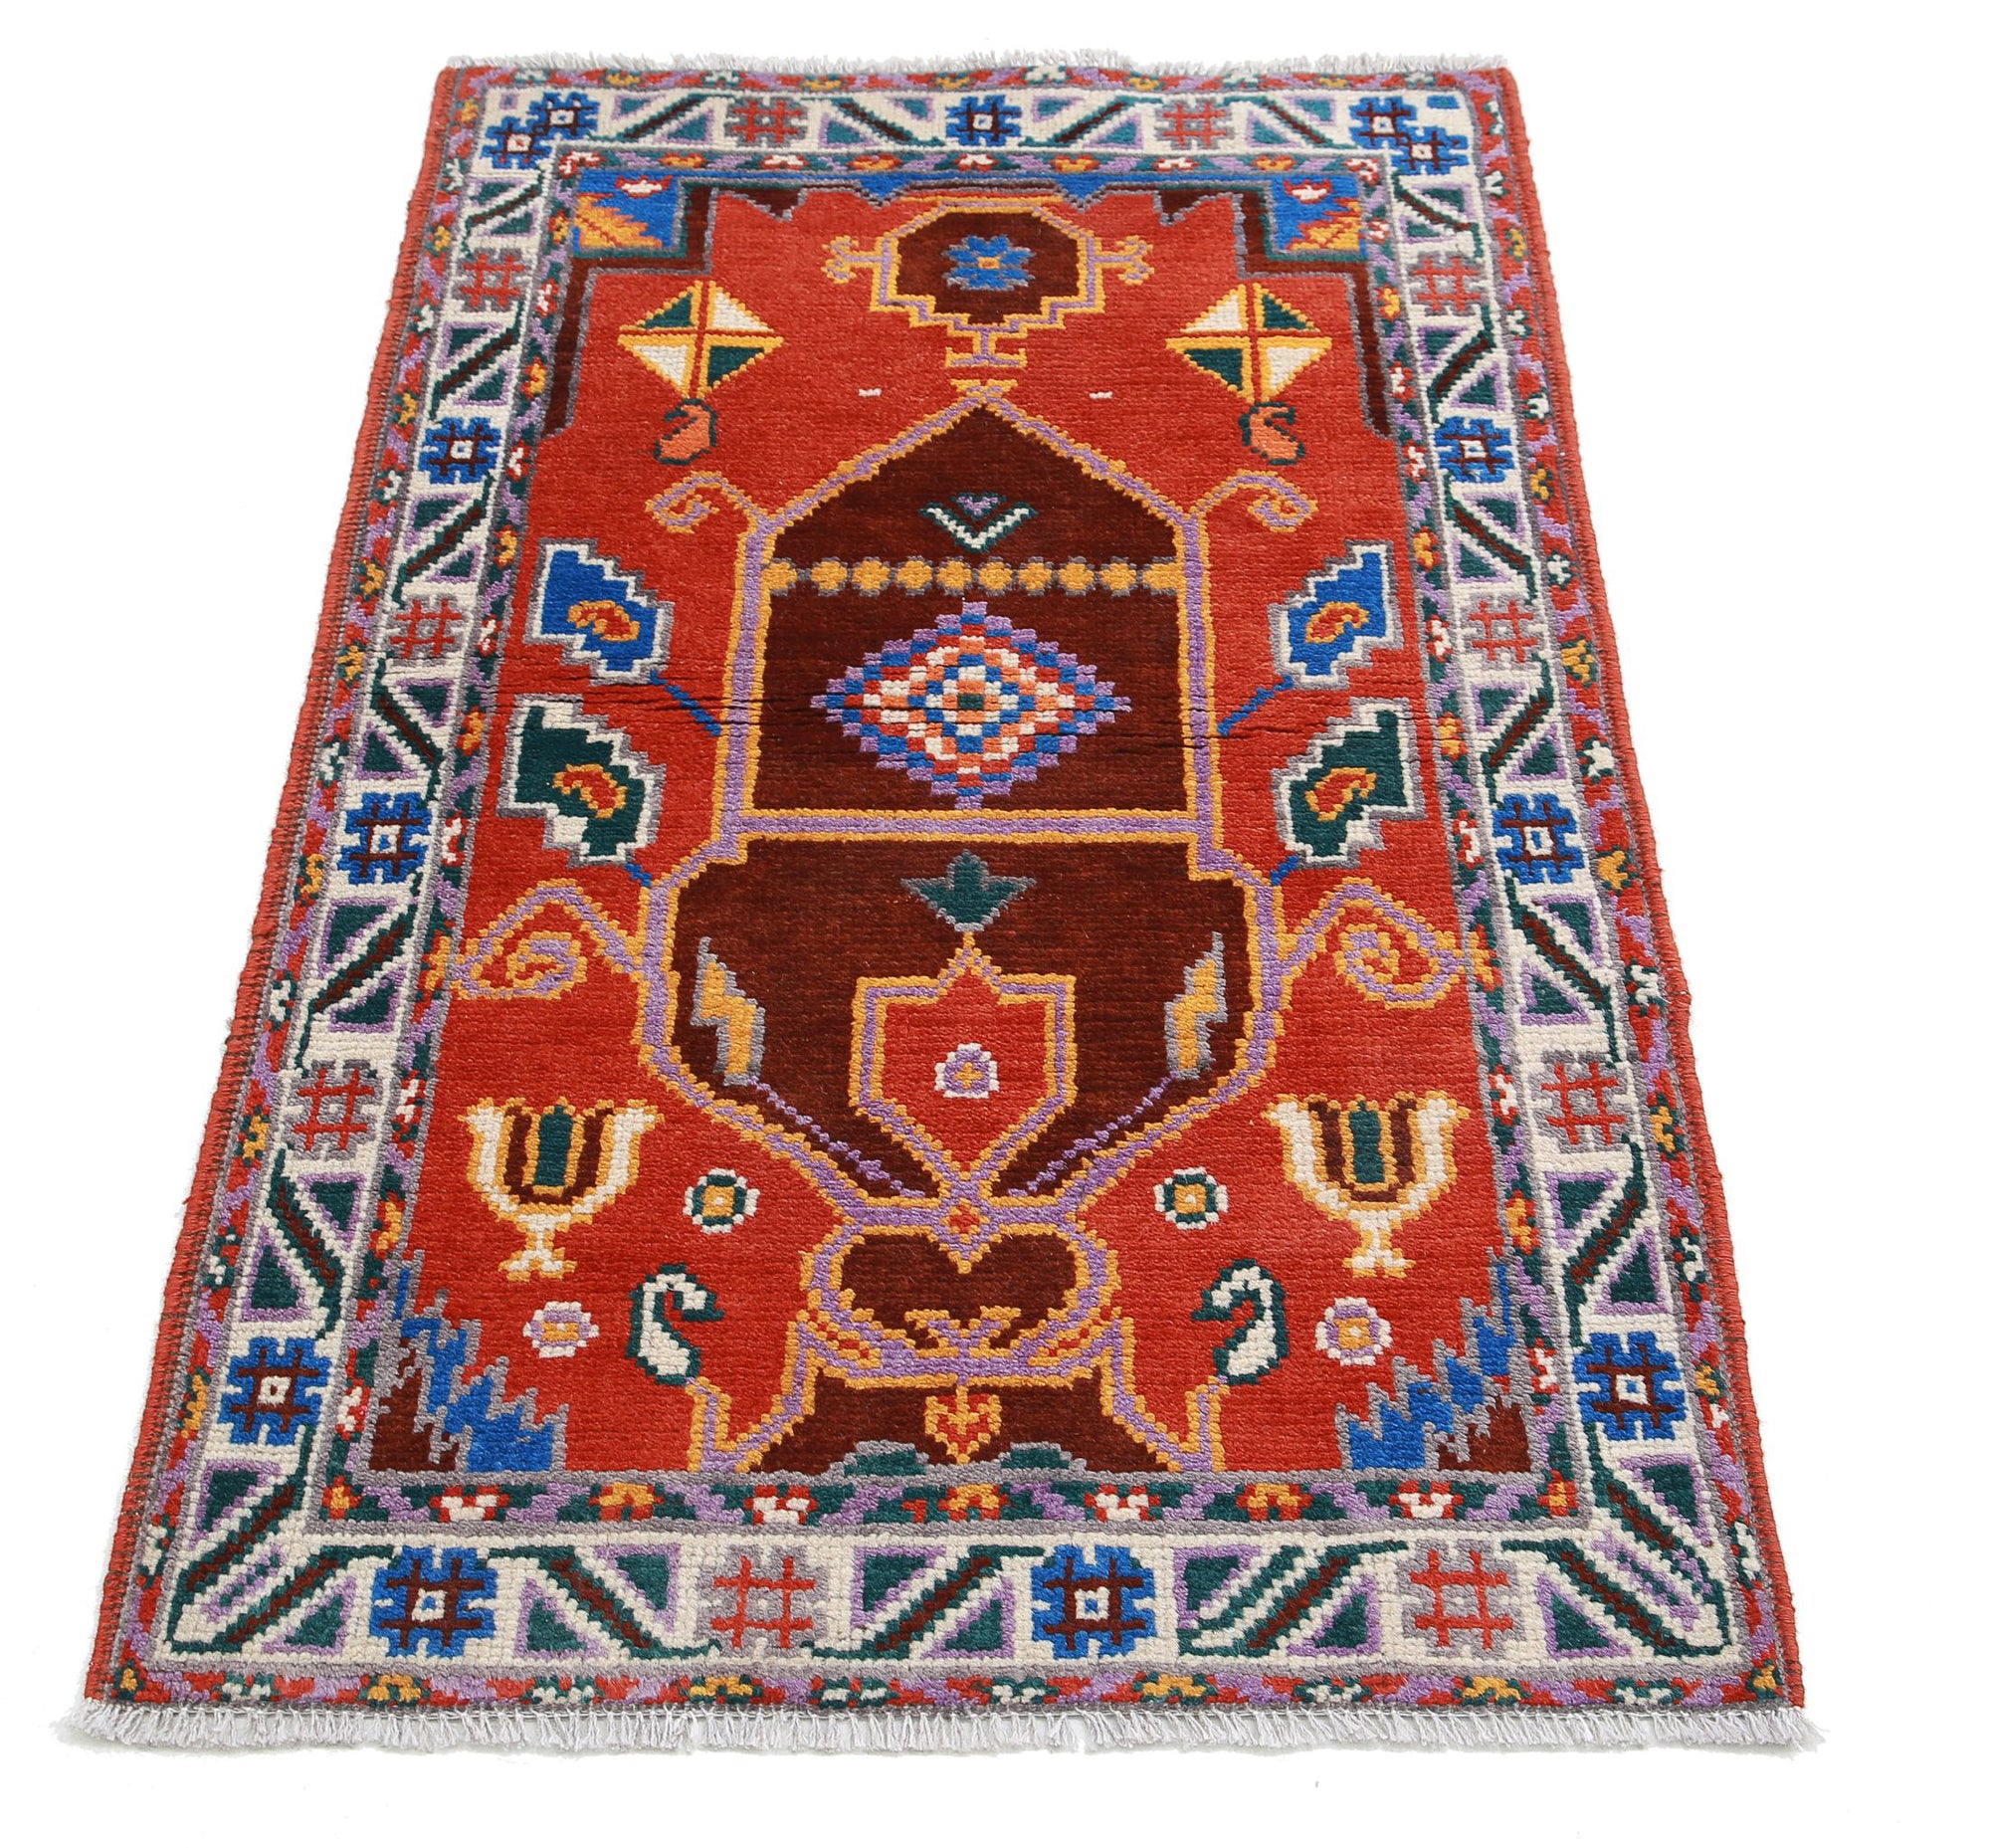 Revival-hand-knotted-qarghani-wool-rug-5014195-3.jpg